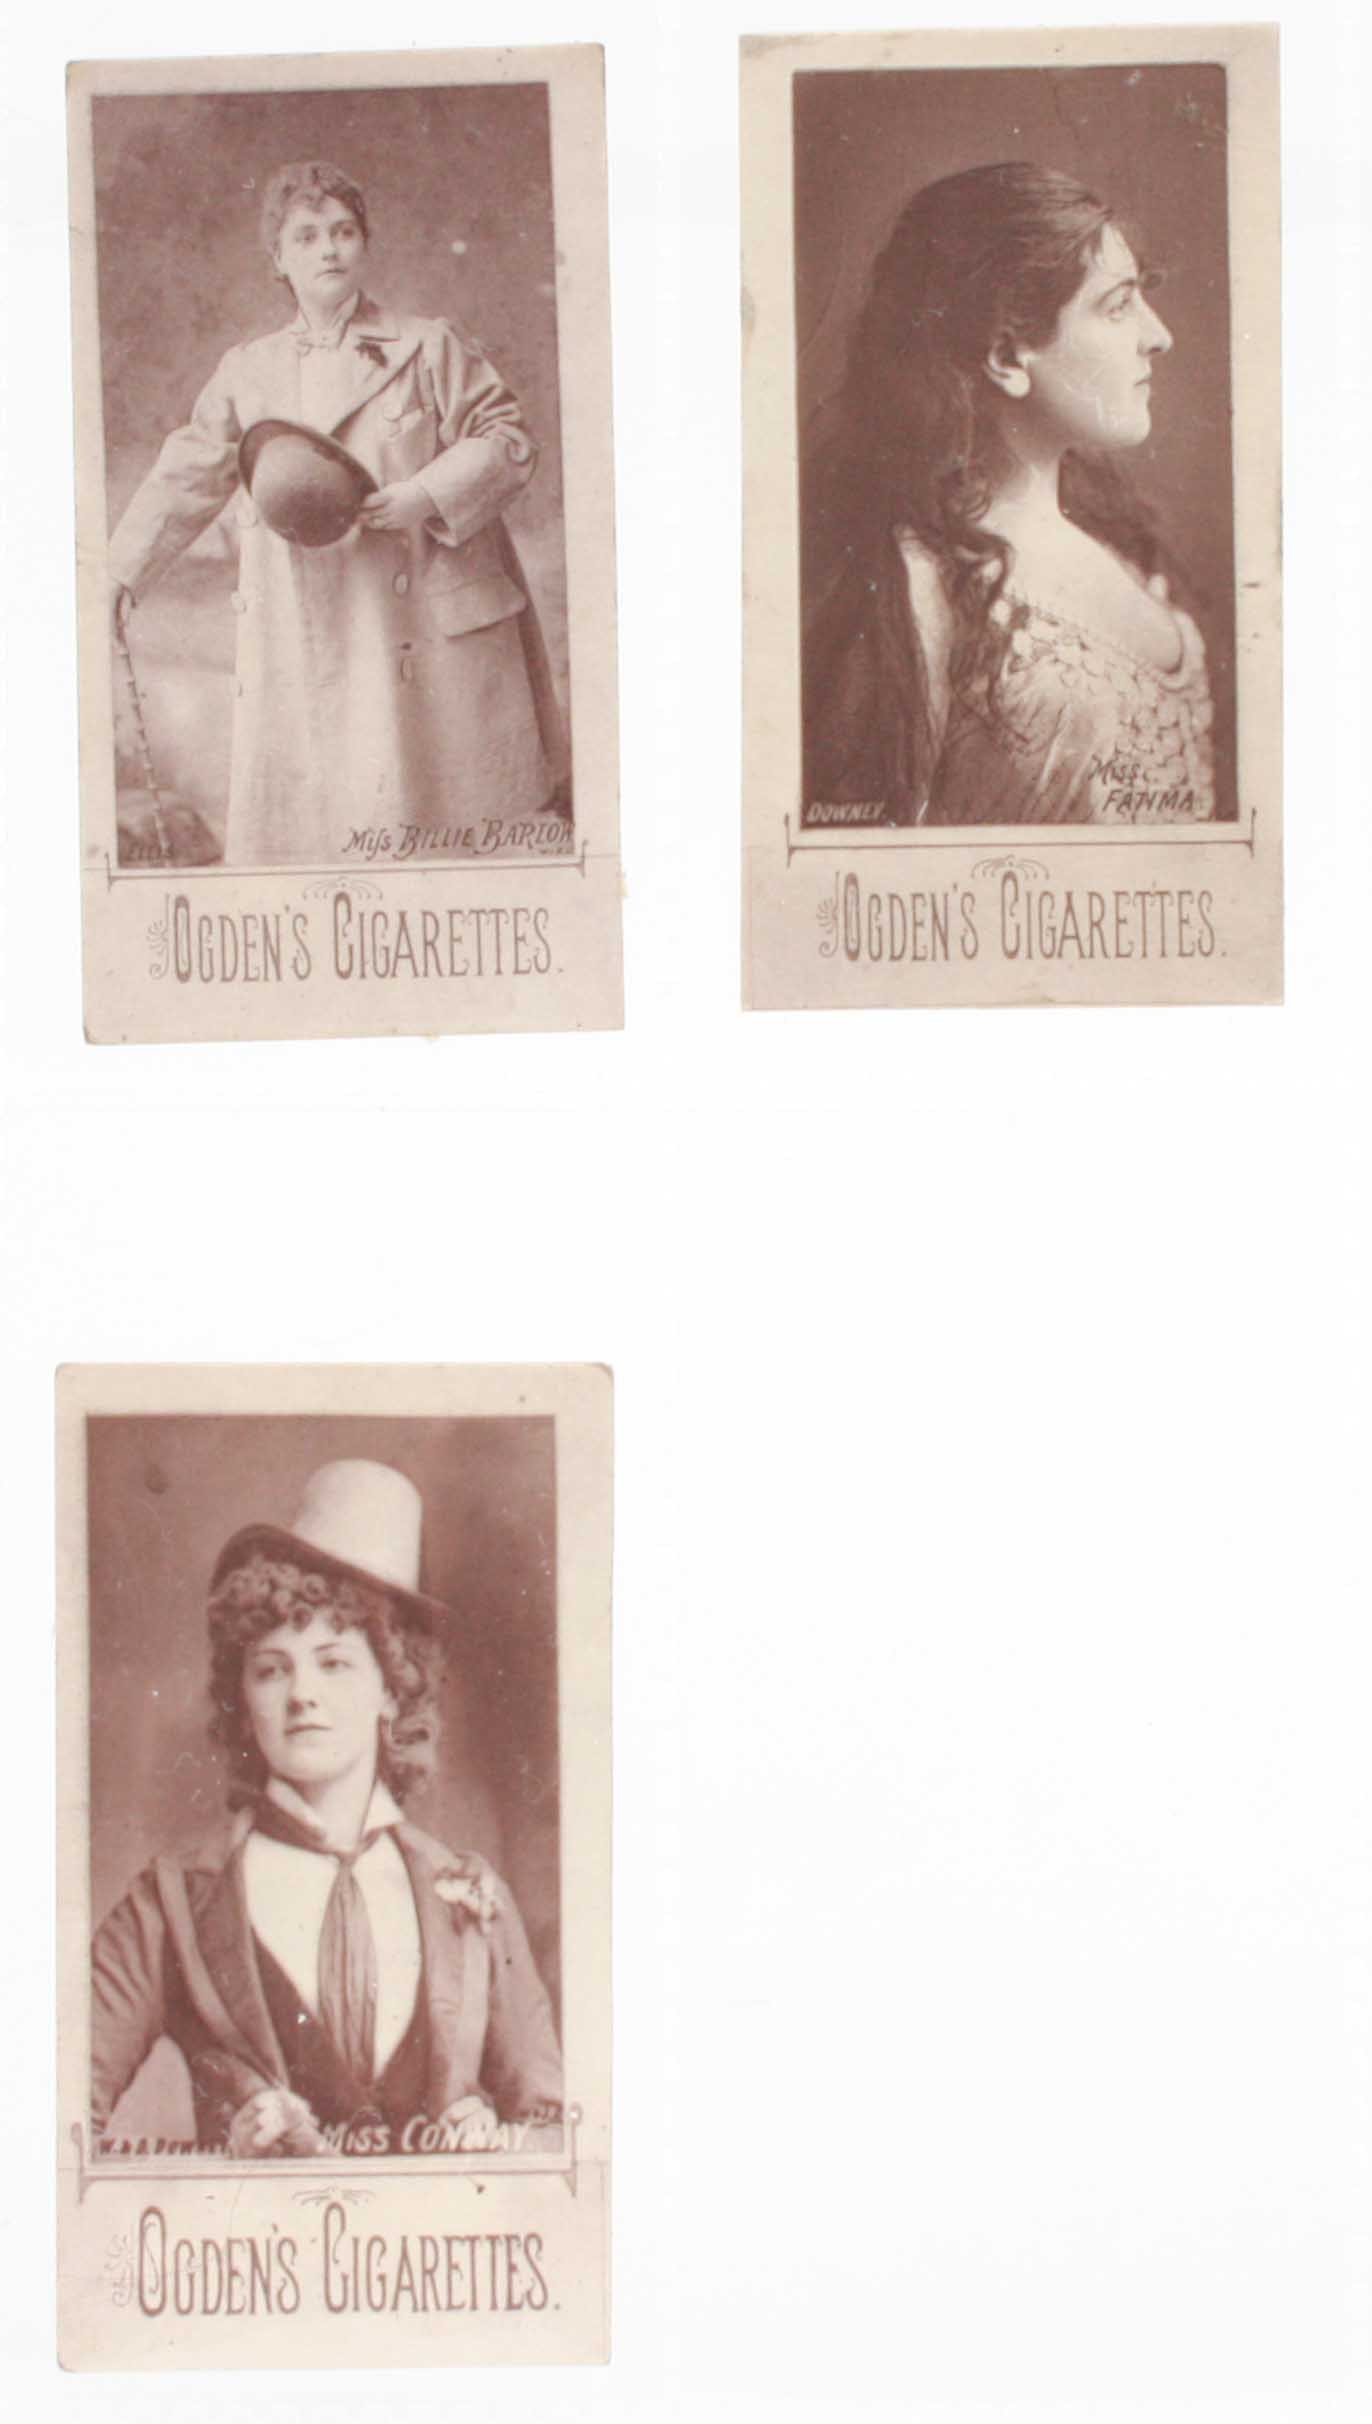 Cigarette cards, Ogden`s, Actresses, Woodburytype, three cards, Miss Billie Barlow, standing looking